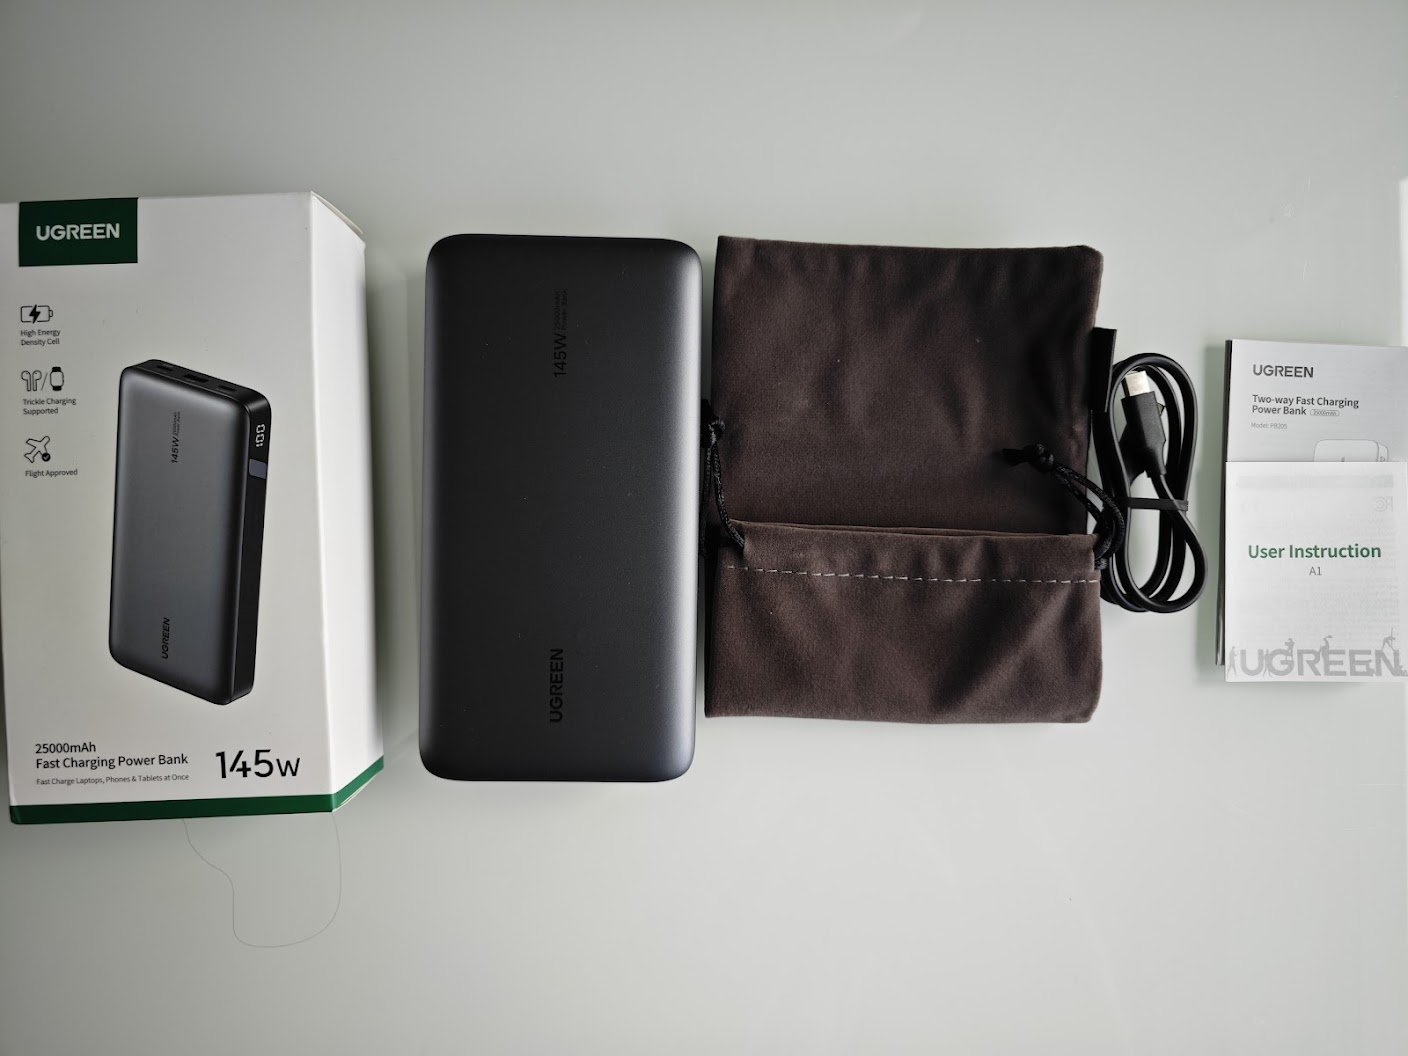 UGREEN 145W 25,000mAh Power Bank Review (Hardware) - Official GBAtemp  Review